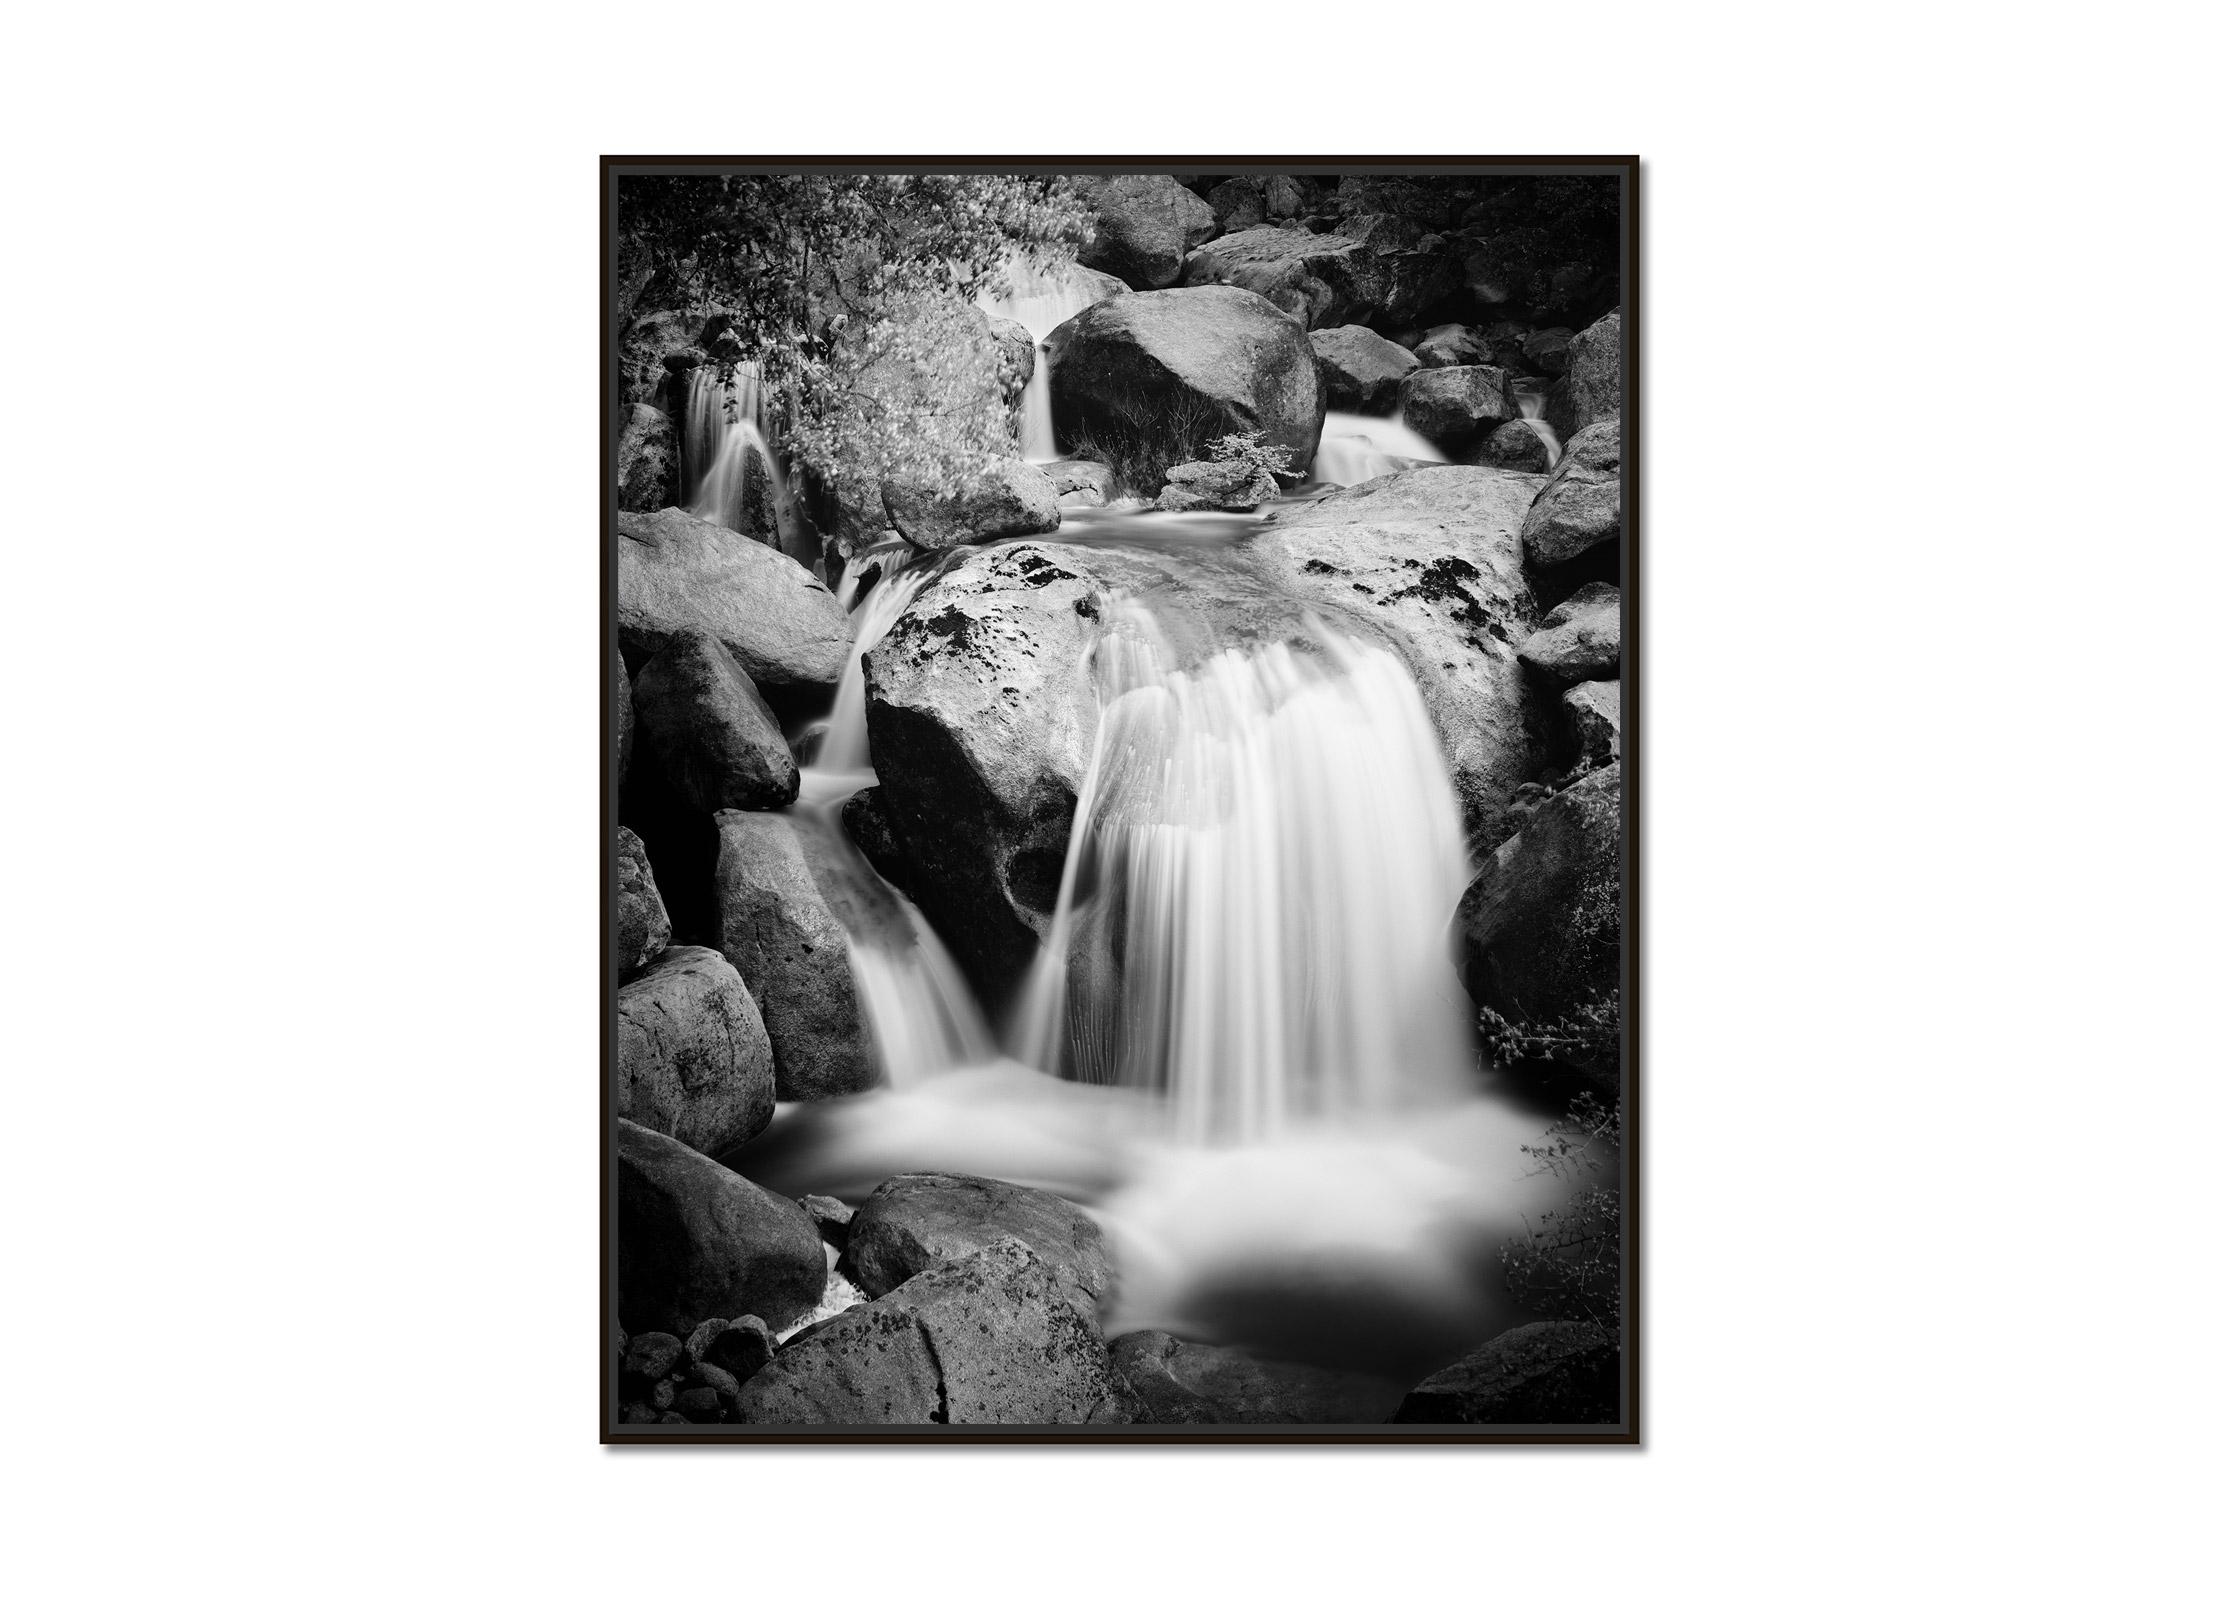 Stony Mountain Stream, California, USA, black and white photography, landscape - Photograph by Gerald Berghammer